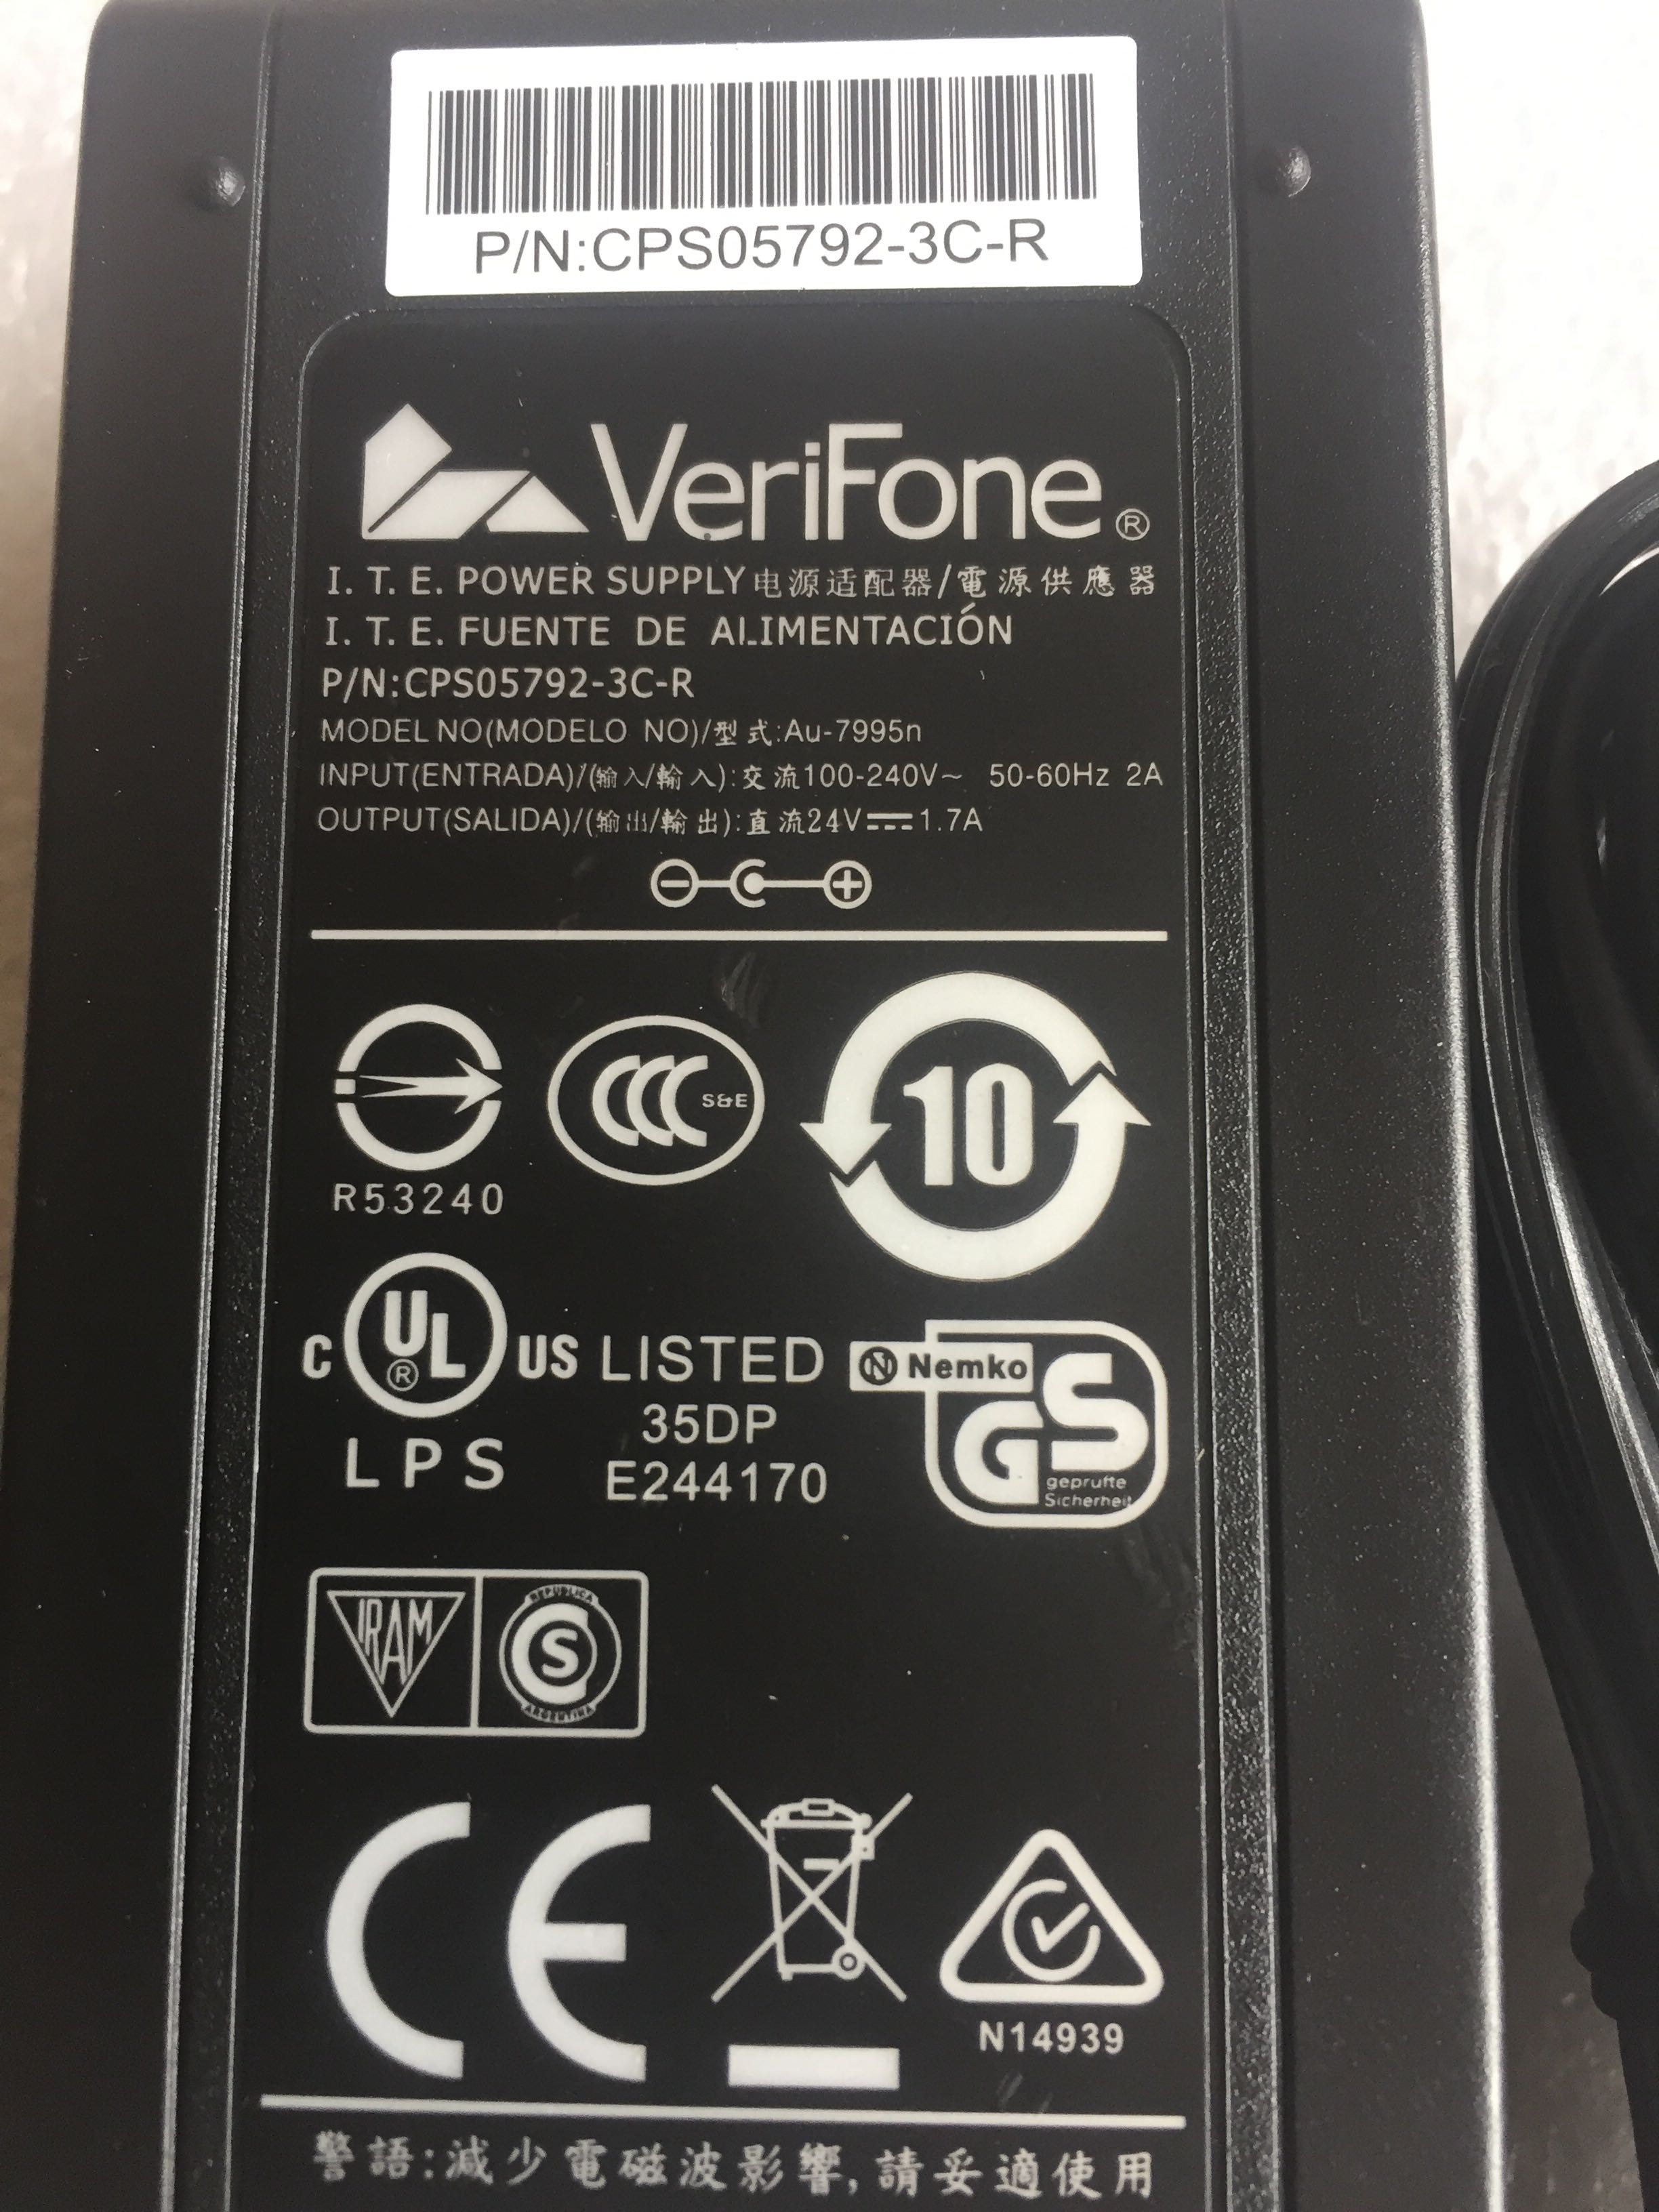 New VeriFone 24V 1.7A CPS05792-3C-R AC ADAPTER FOR POS DEVICE CHARGER